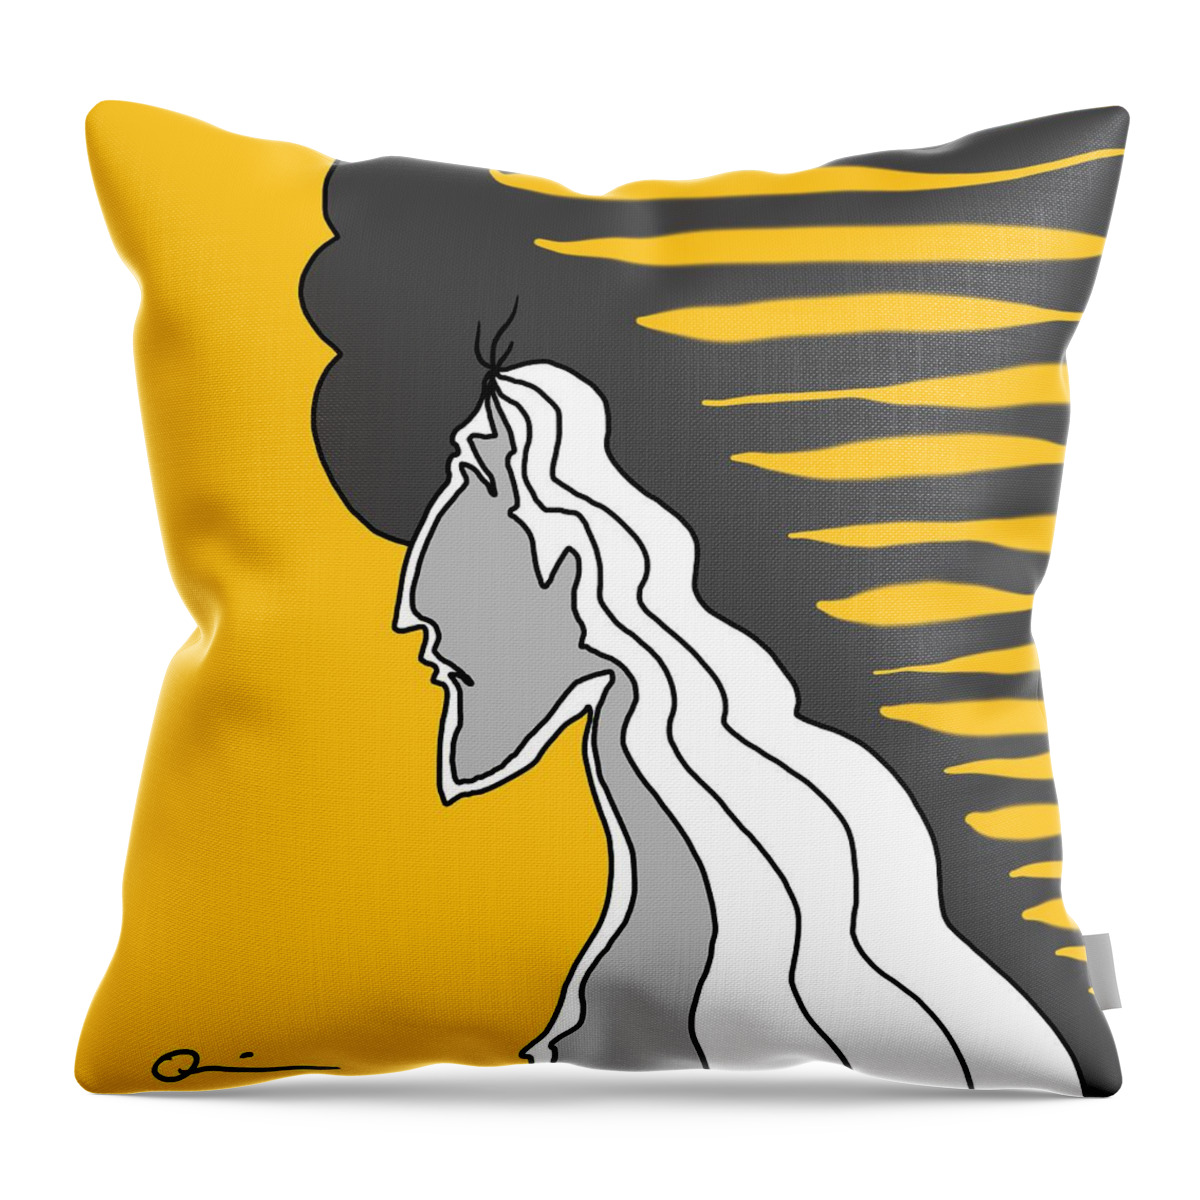 Face Throw Pillow featuring the digital art Bright Days Ahead by Jeffrey Quiros